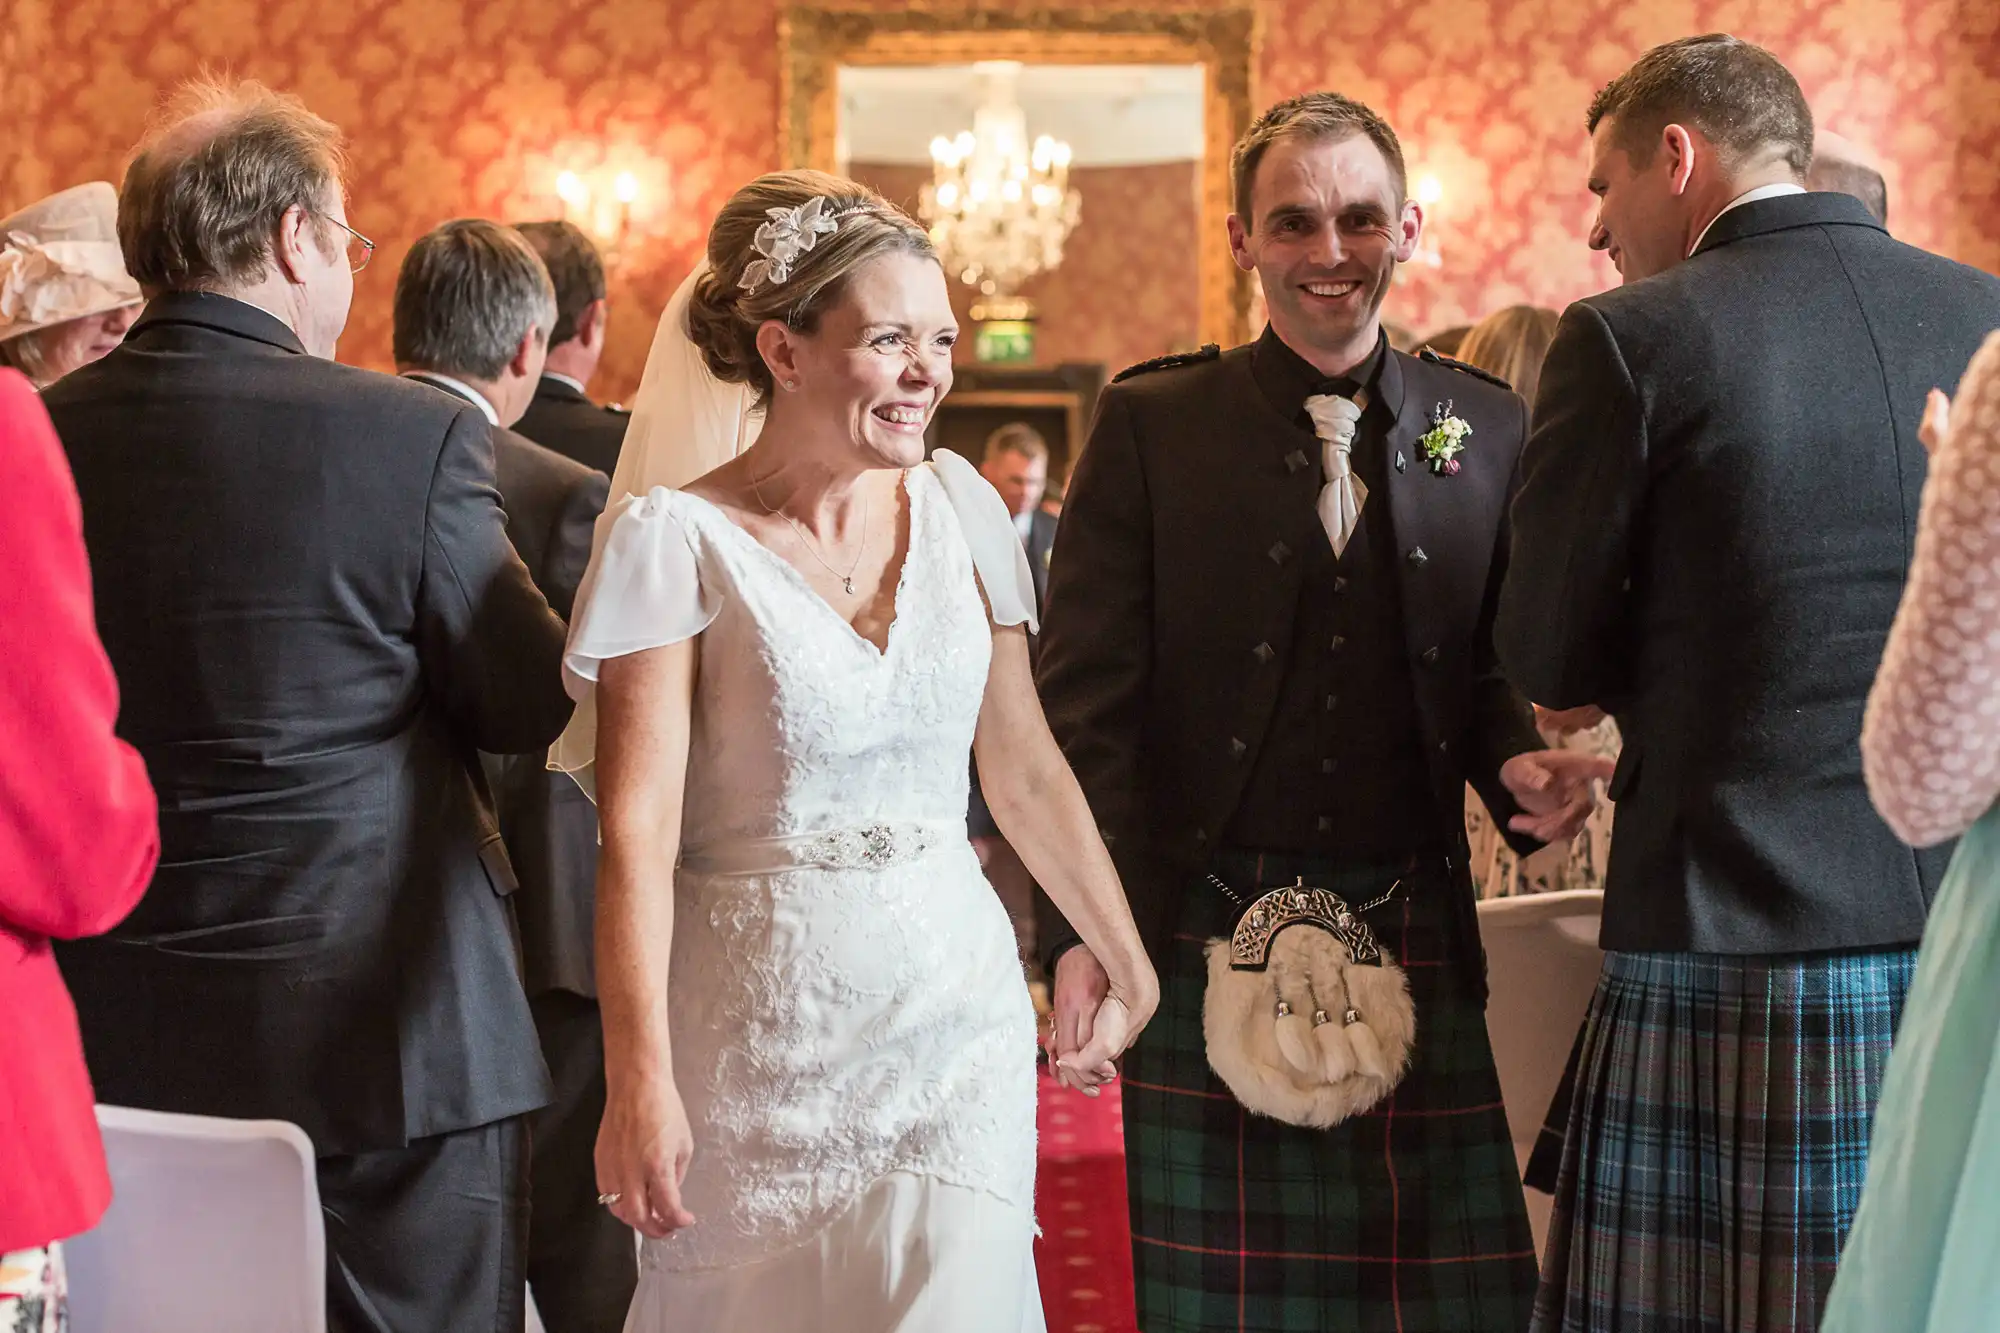 A bride in a white dress and a groom in a scottish kilt, both smiling, walk hand in hand through a crowd at a wedding reception.